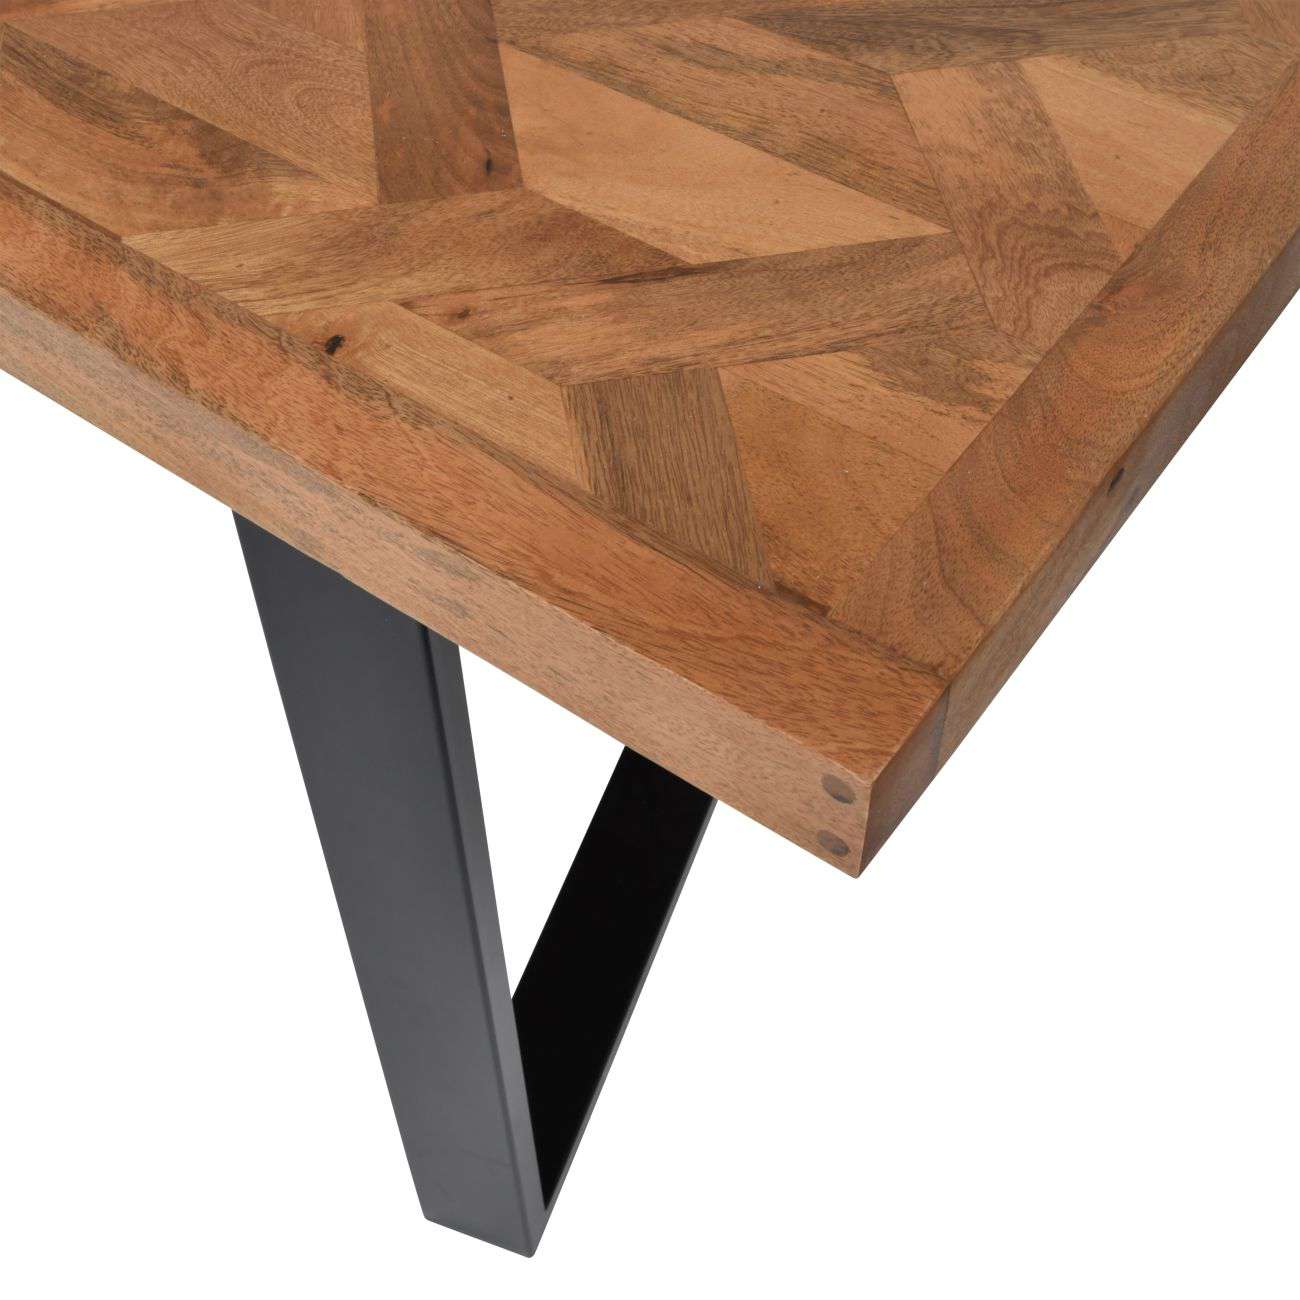 Hanover Geometric Wooden Dining Table